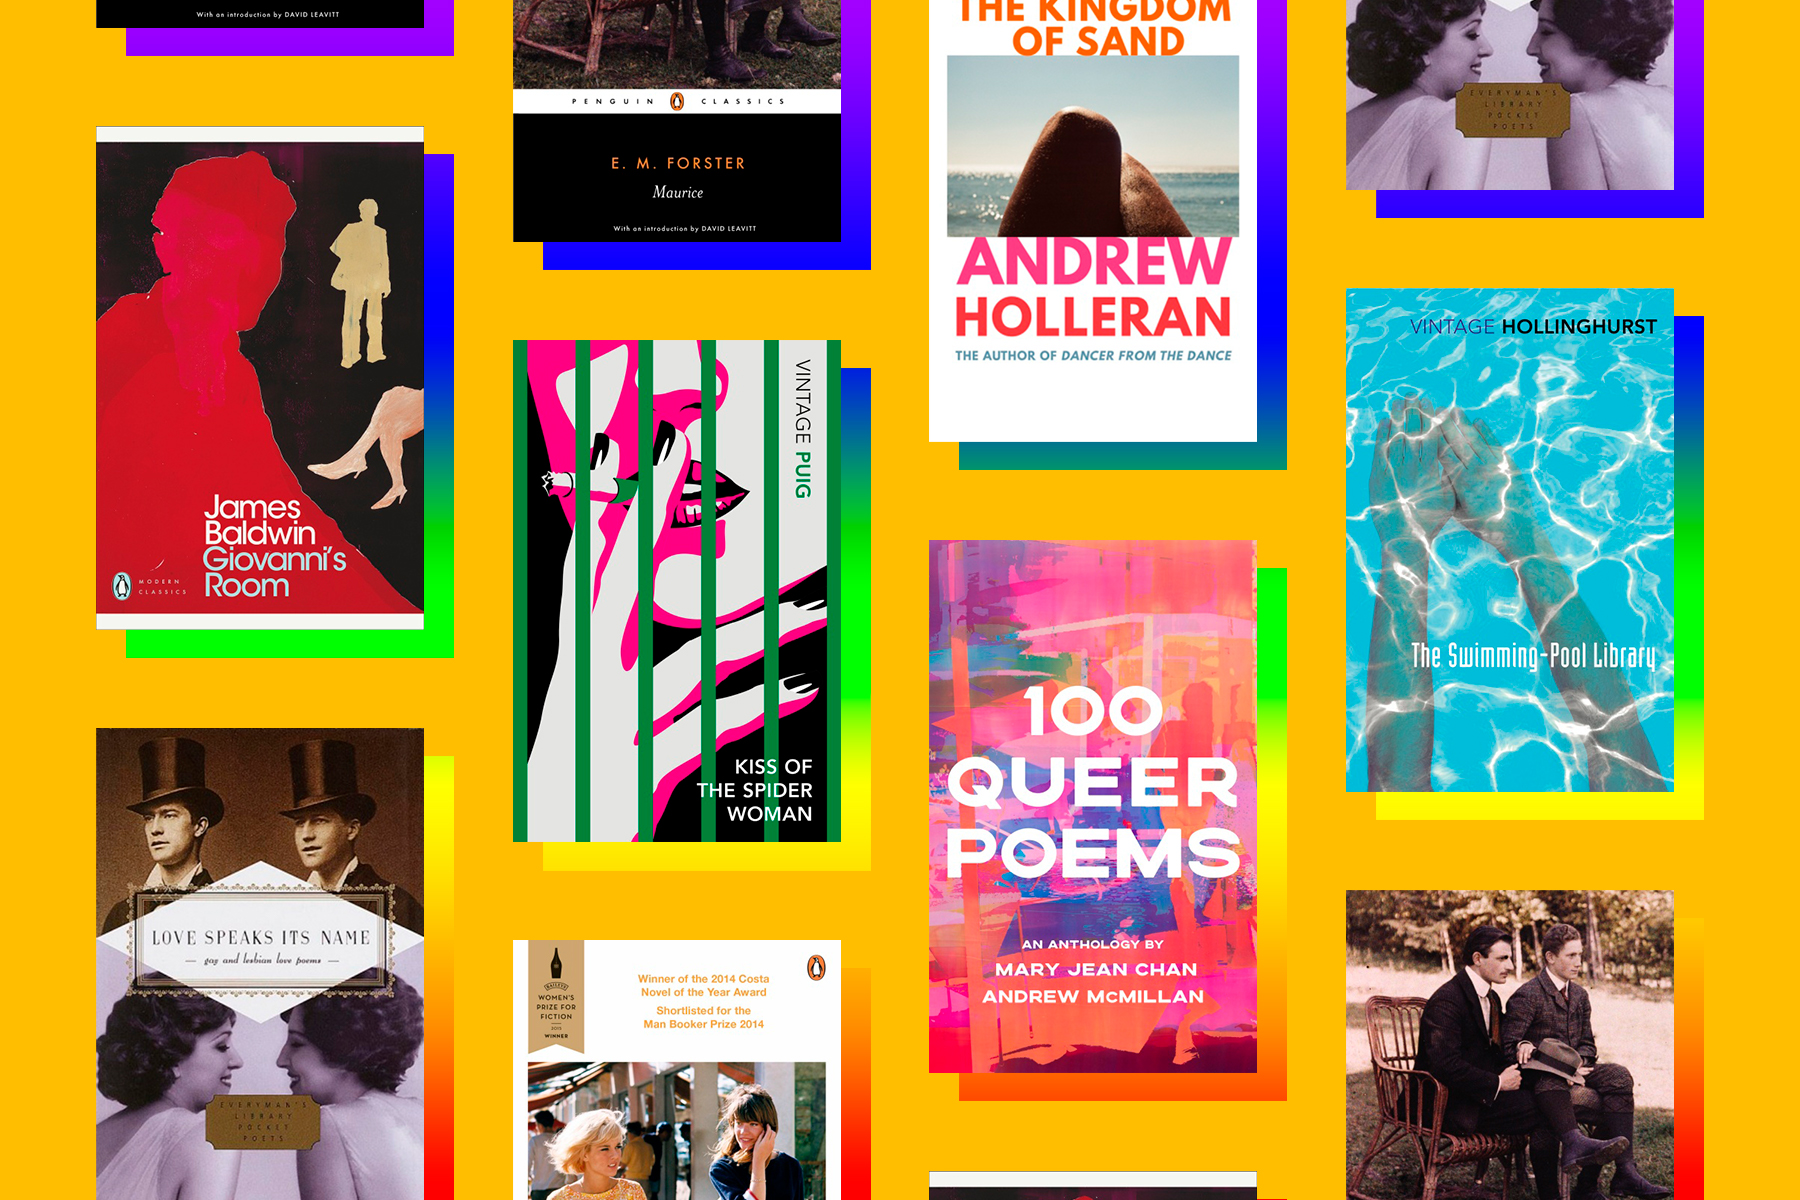 A host of LGBTQ+ classic titles, including books by Ali Smith, James Baldwin and E. M. Forster, laid over a yellow background.